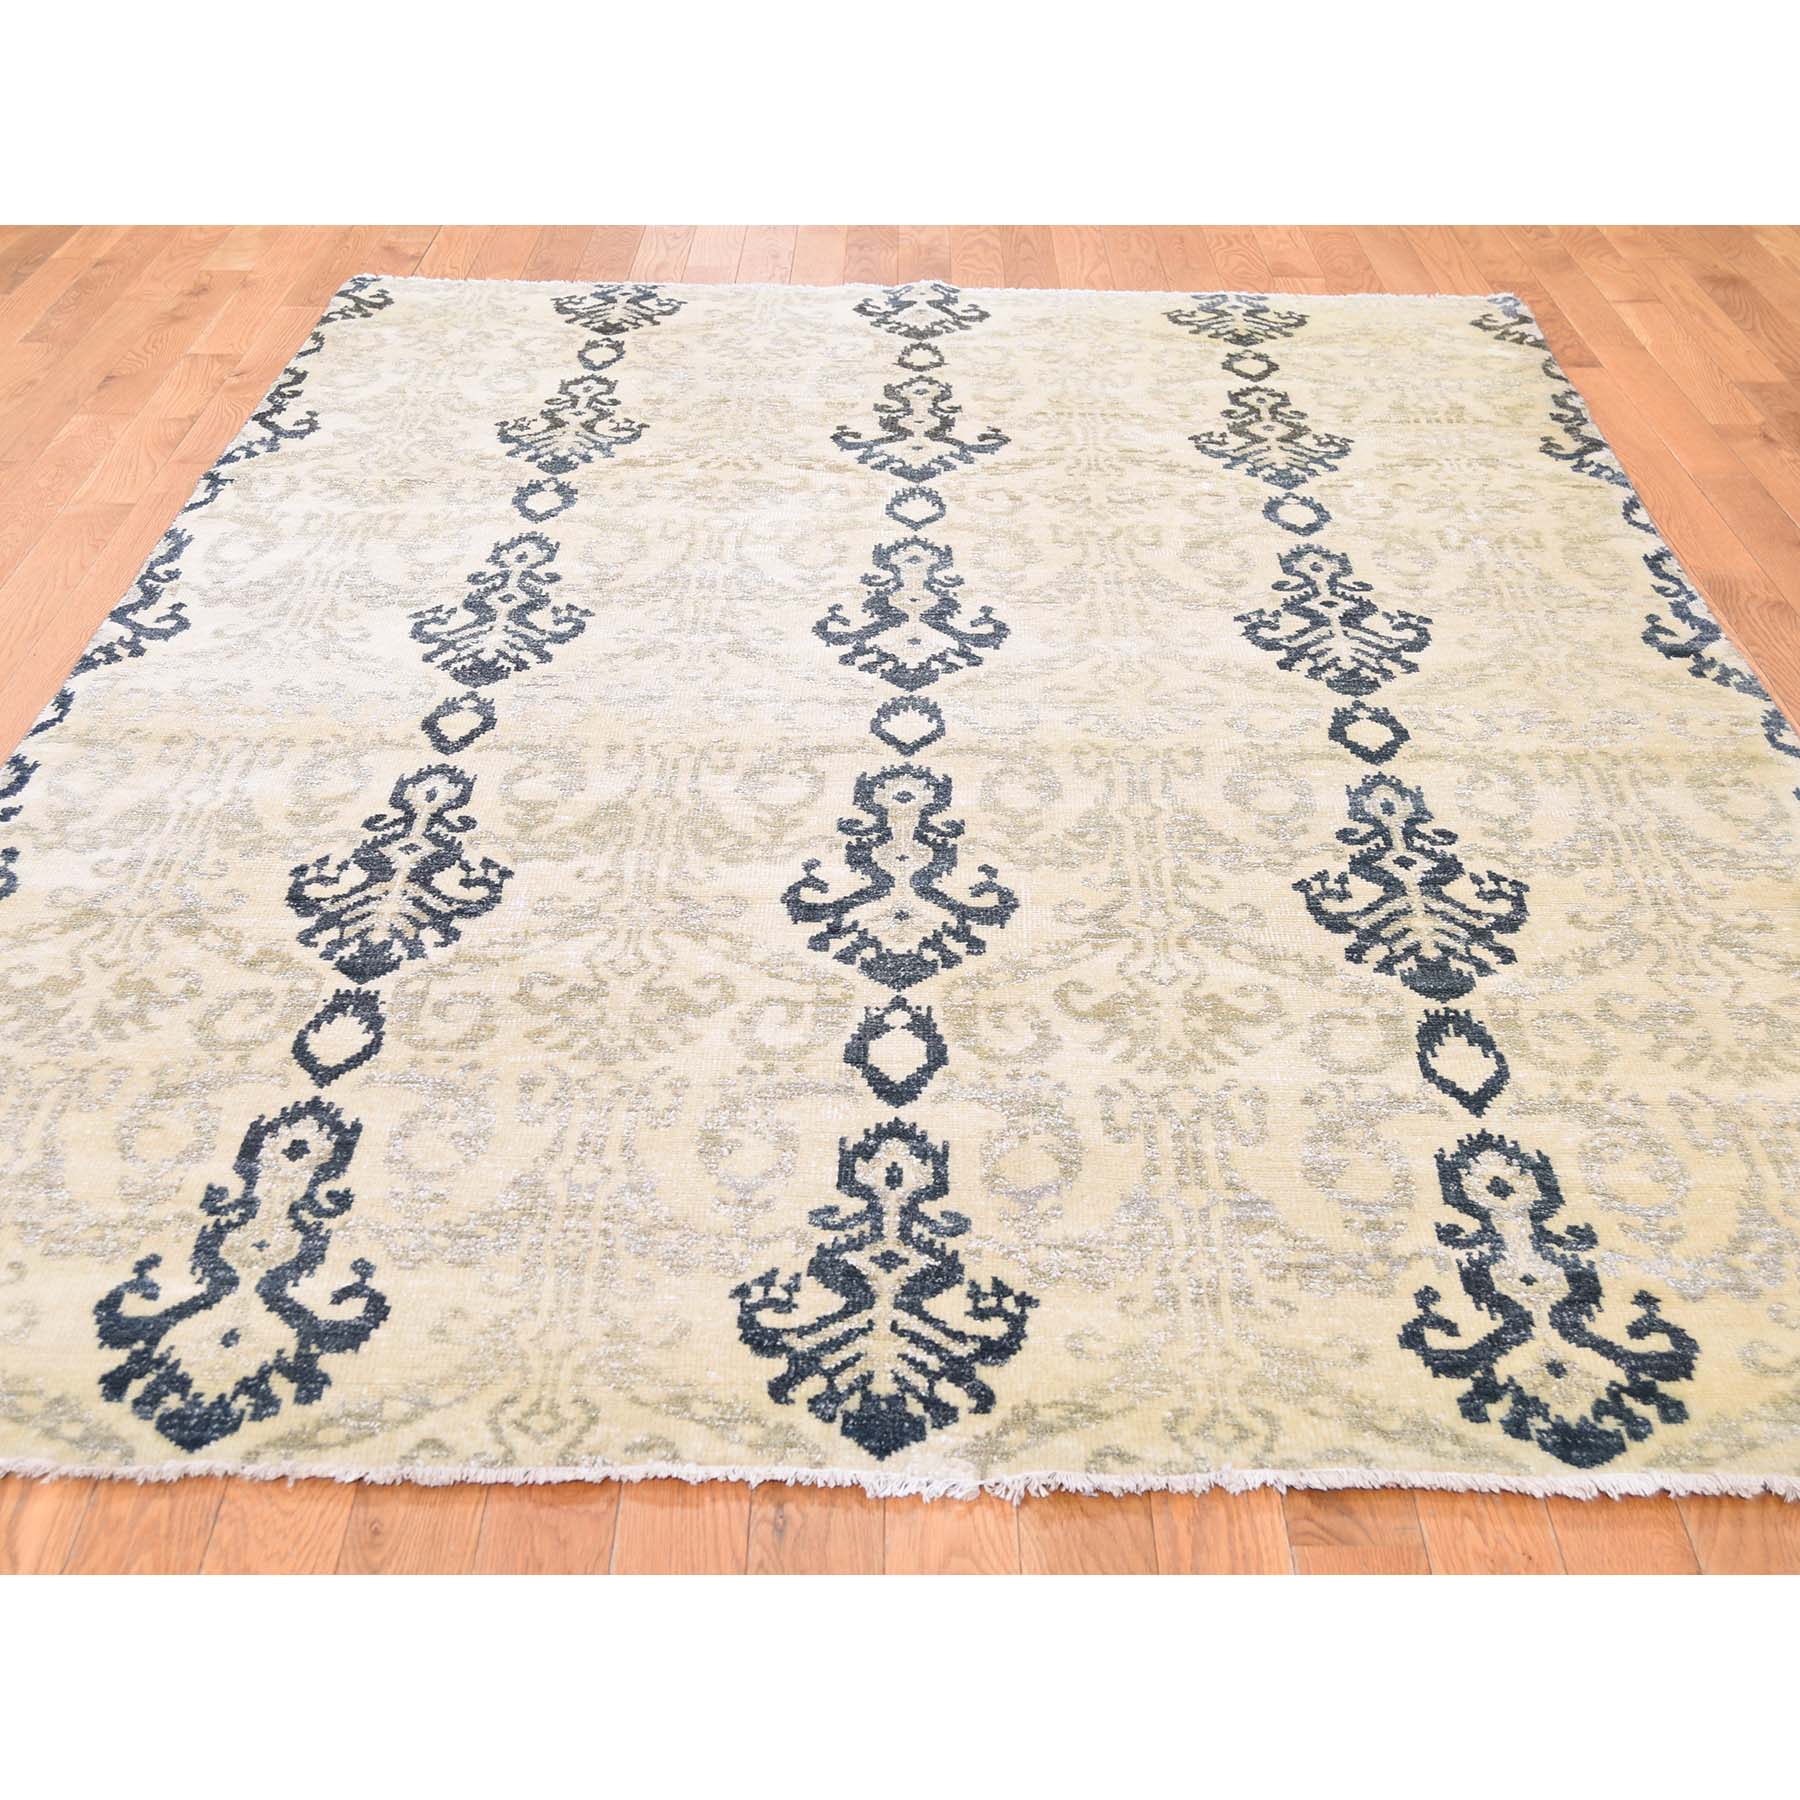 5-10 x8-7  Ikat Design Pure Wool Hand Knotted Oriental Rug 